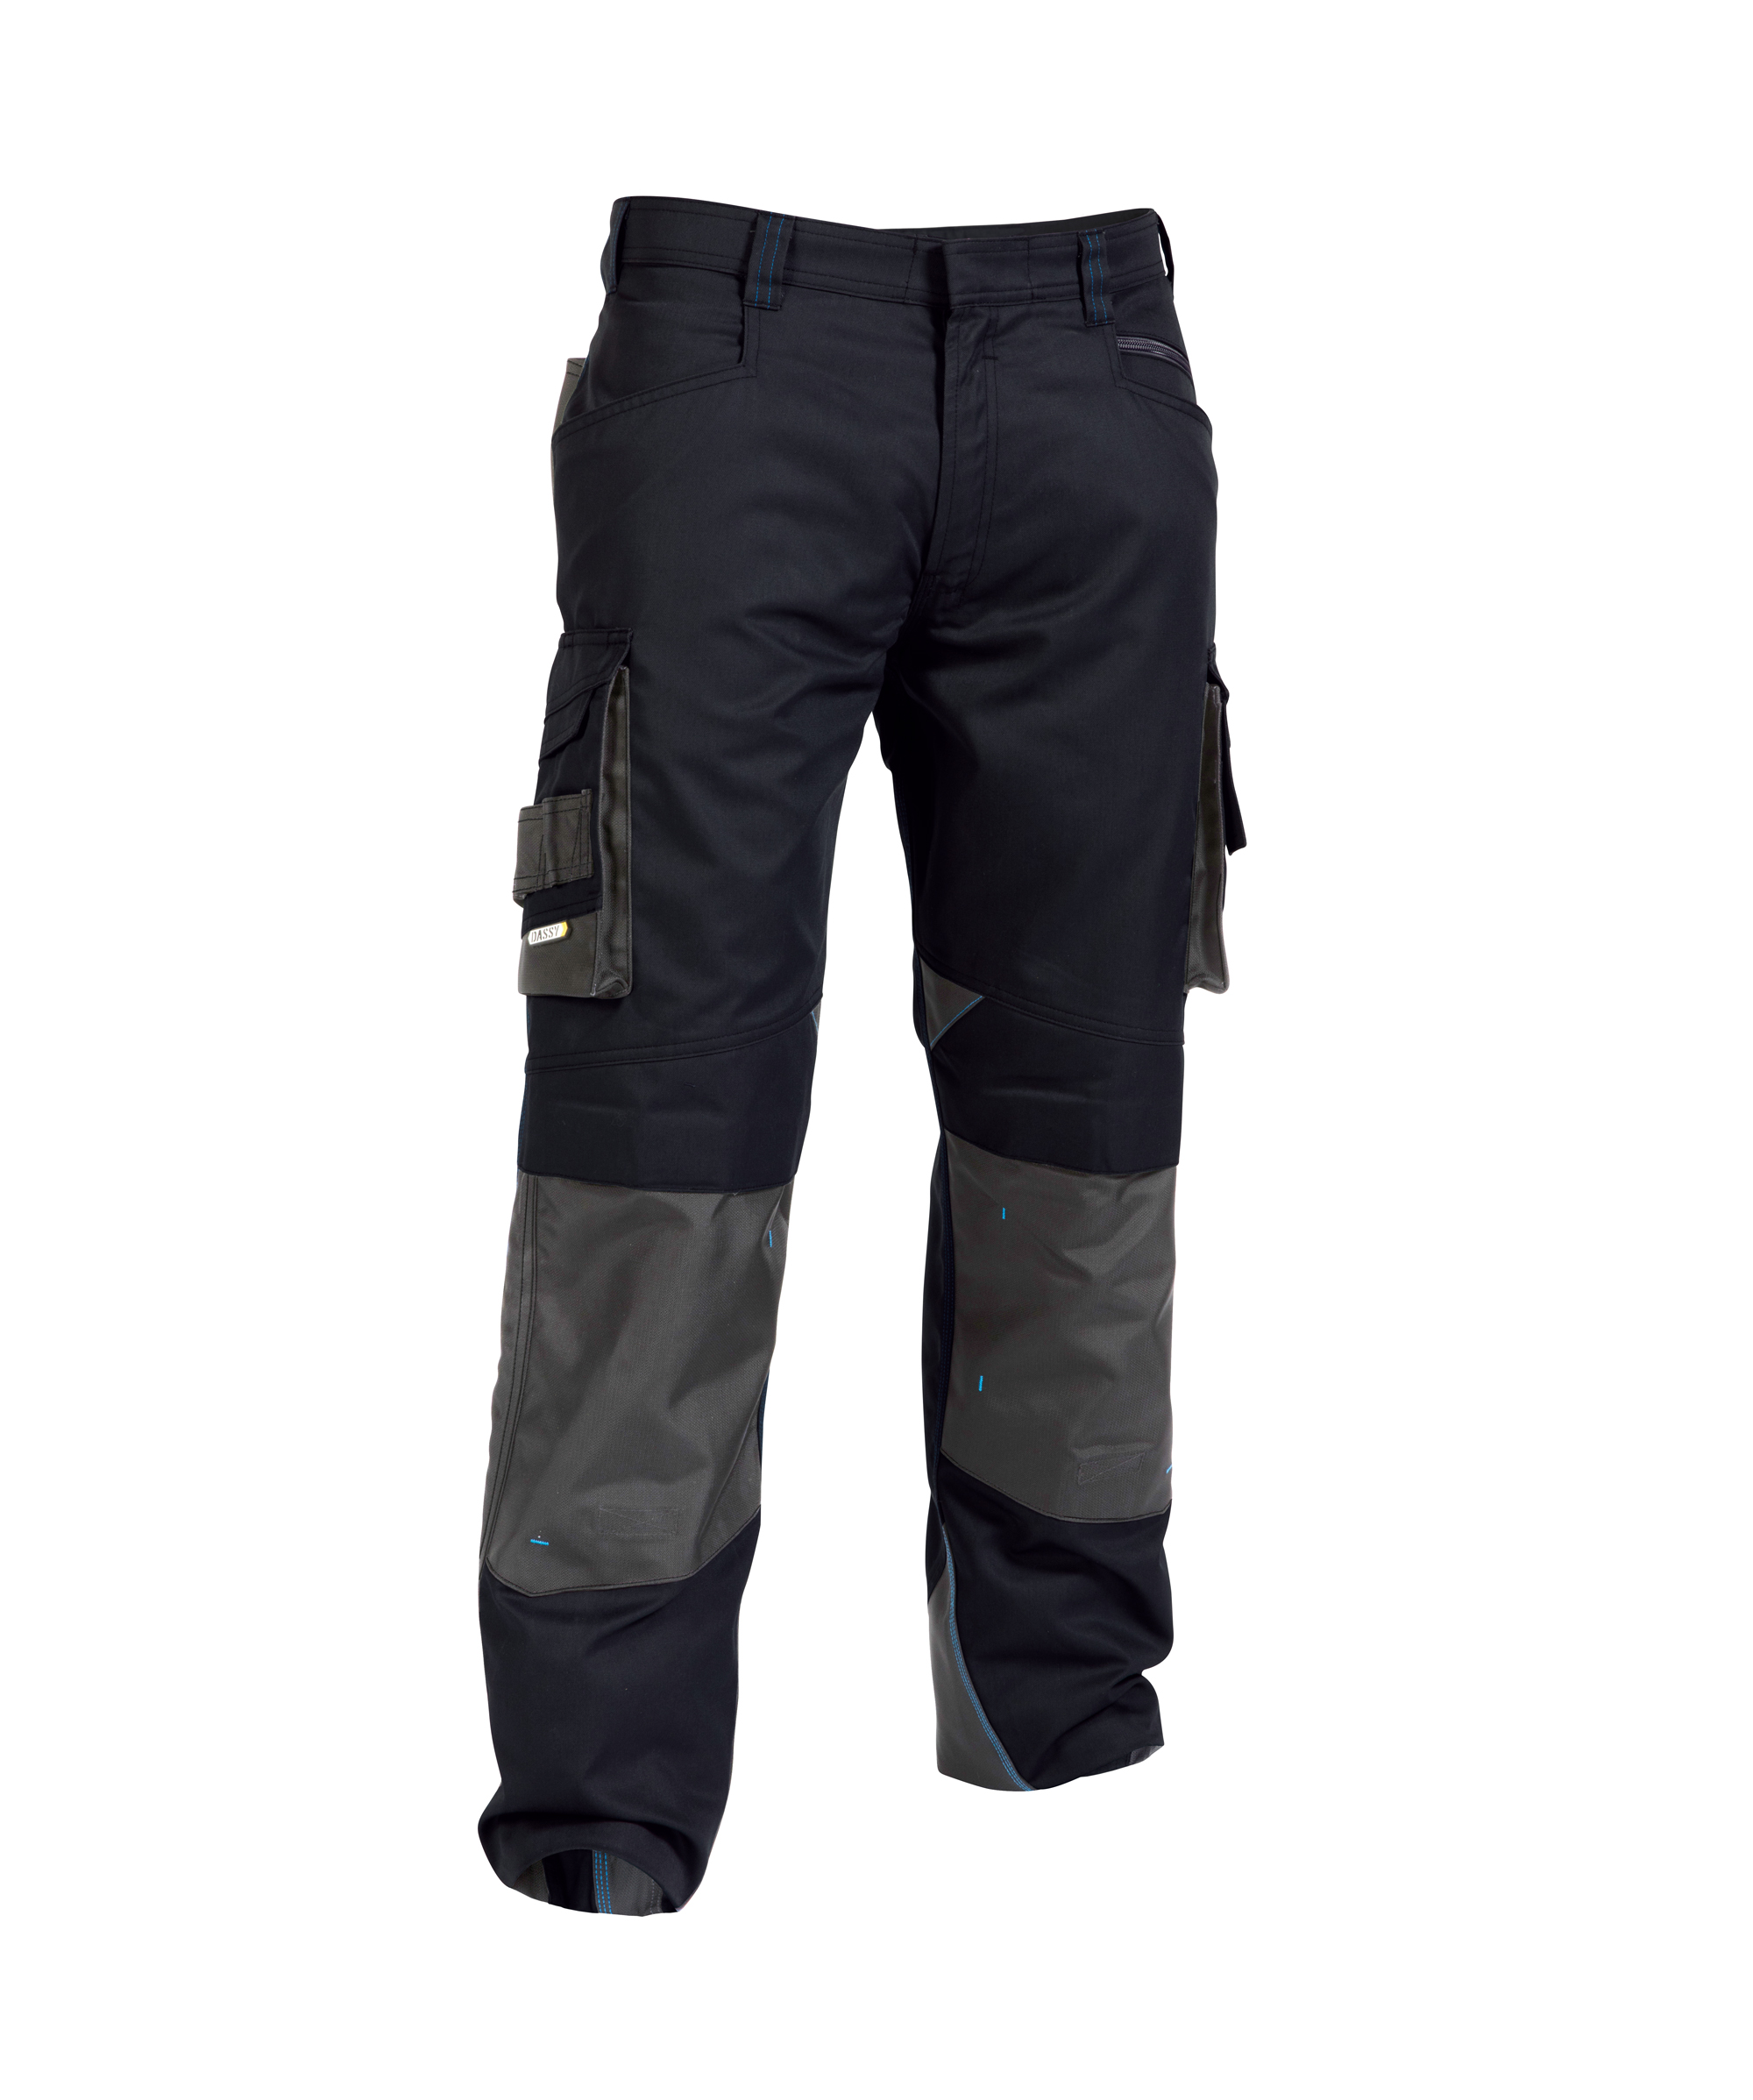 nova_two-tone-work-trousers-with-knee-pockets_midnight-blue-anthracite-grey_side.jpg